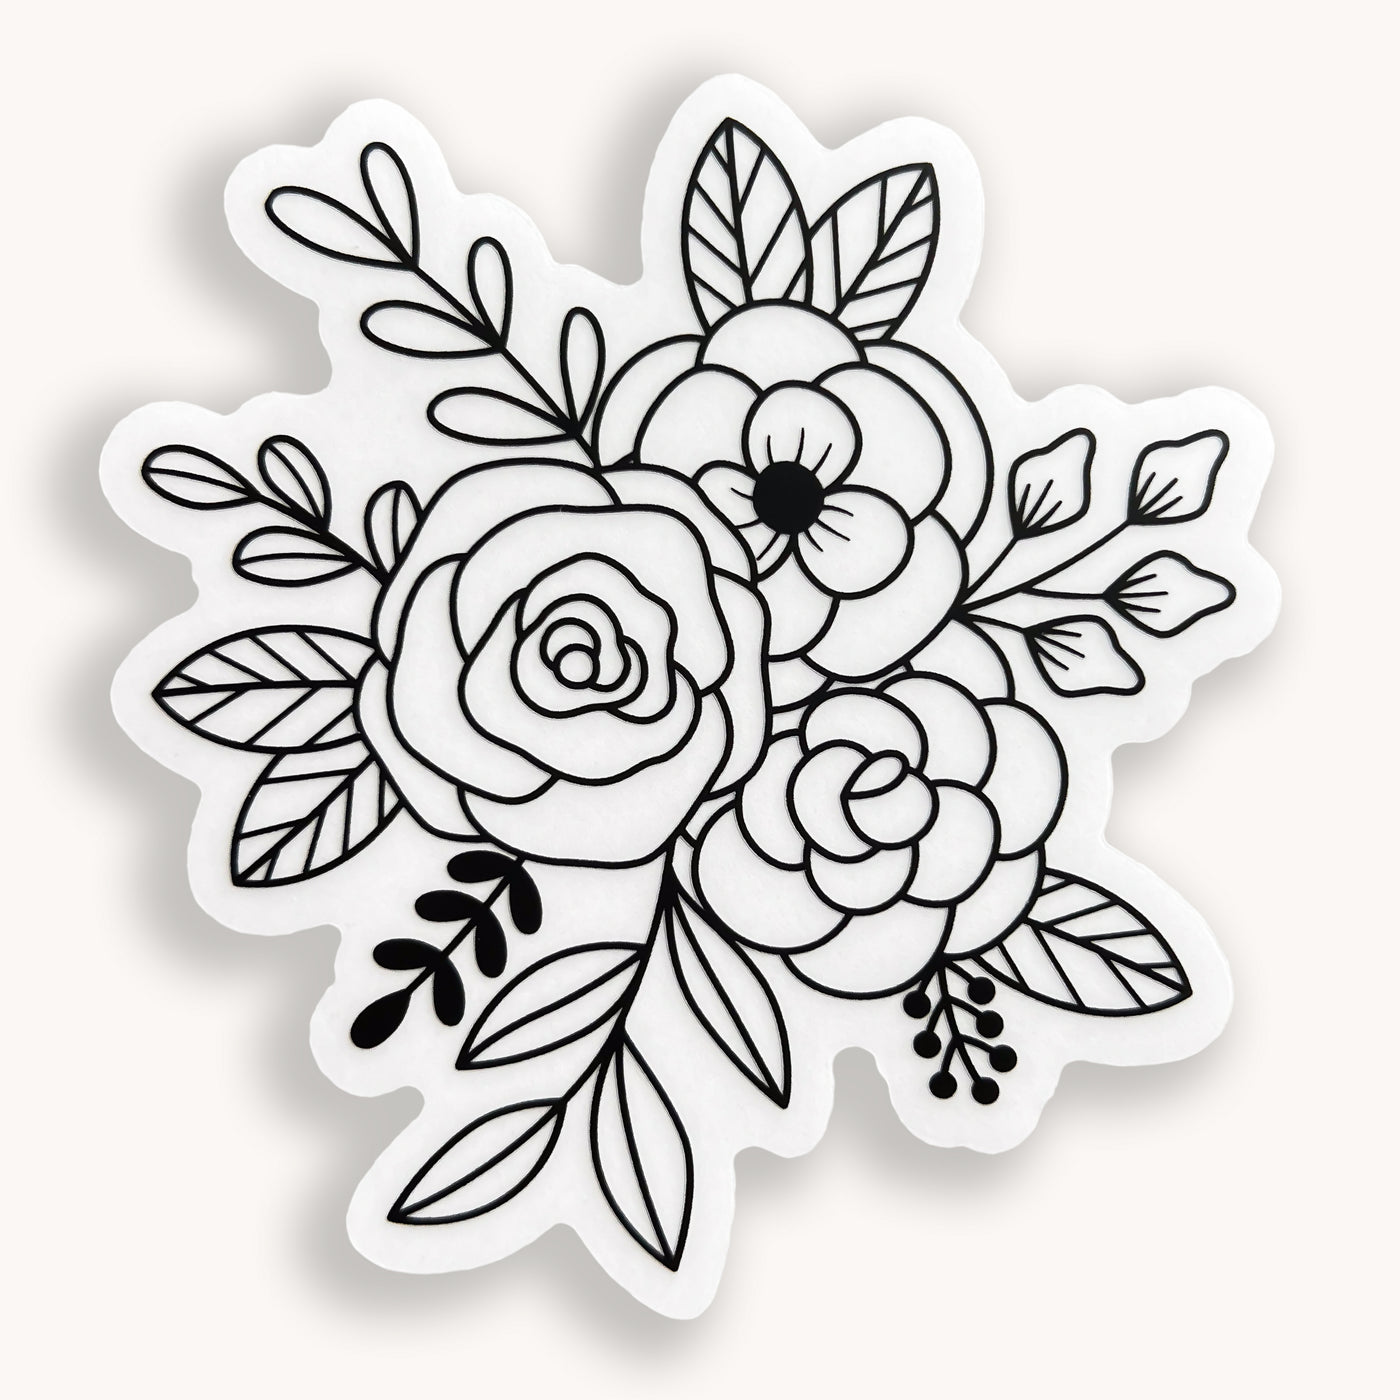 Line drawn bouquet of flowers clear vinyl sticker comes with a solid white backing by Simpliday Paper Olga Nagorna.